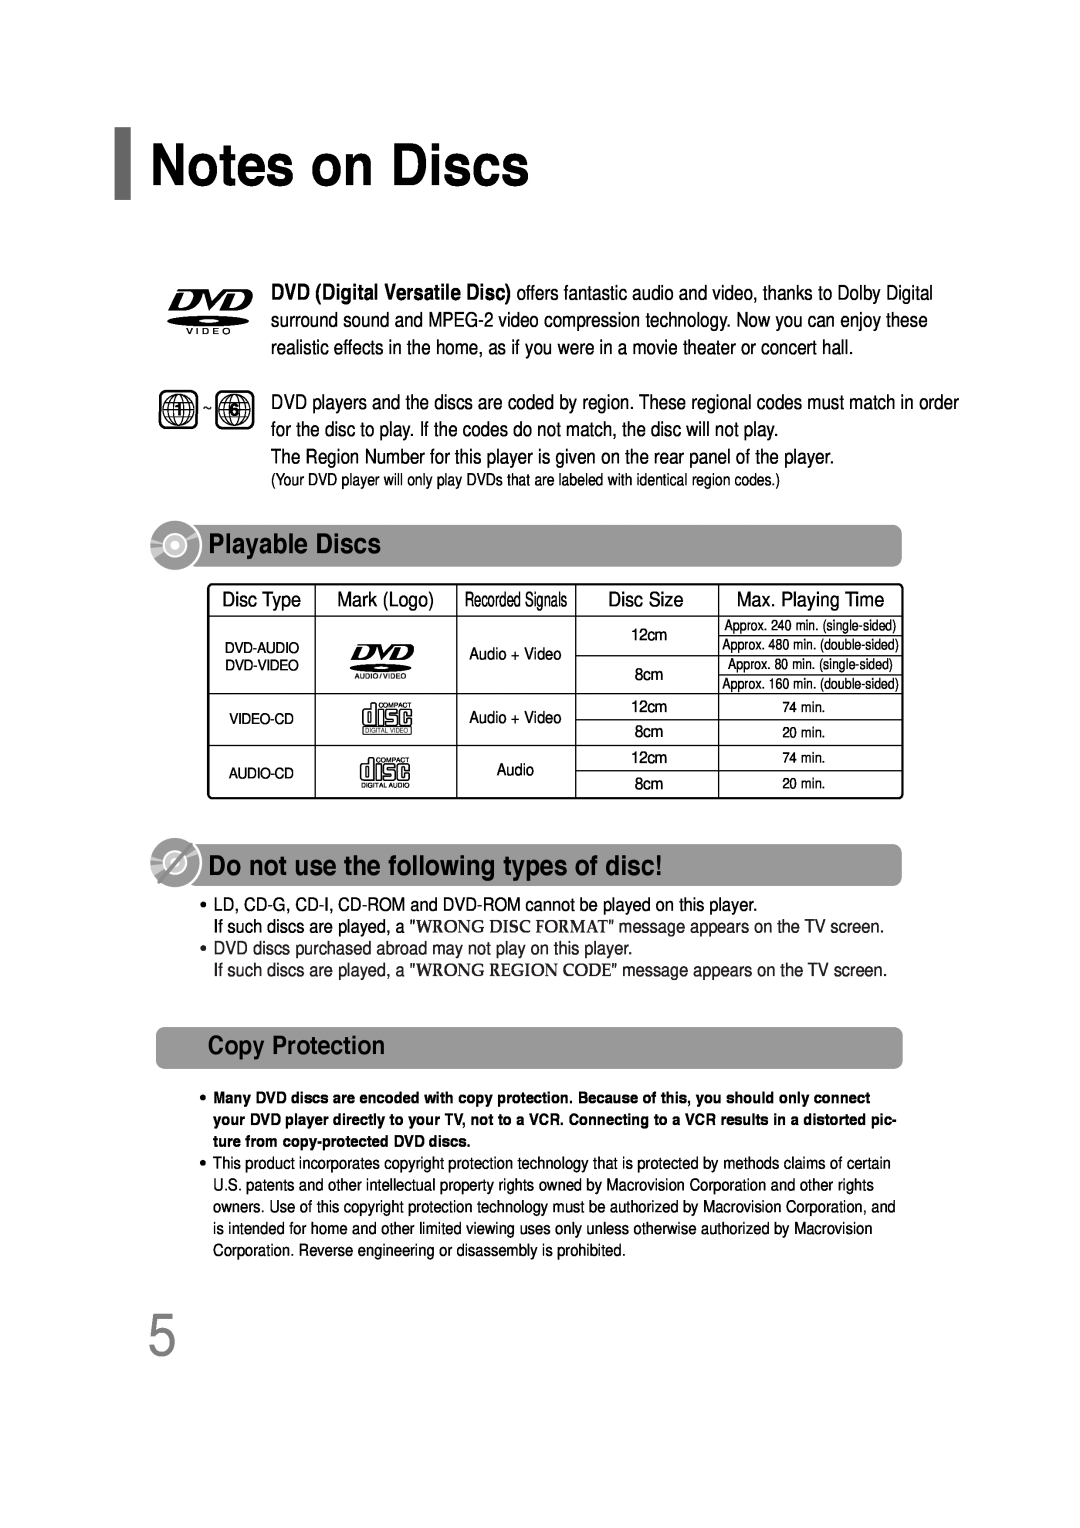 Samsung HT-P30 instruction manual Notes on Discs, Playable Discs, Do not use the following types of disc, Copy Protection 